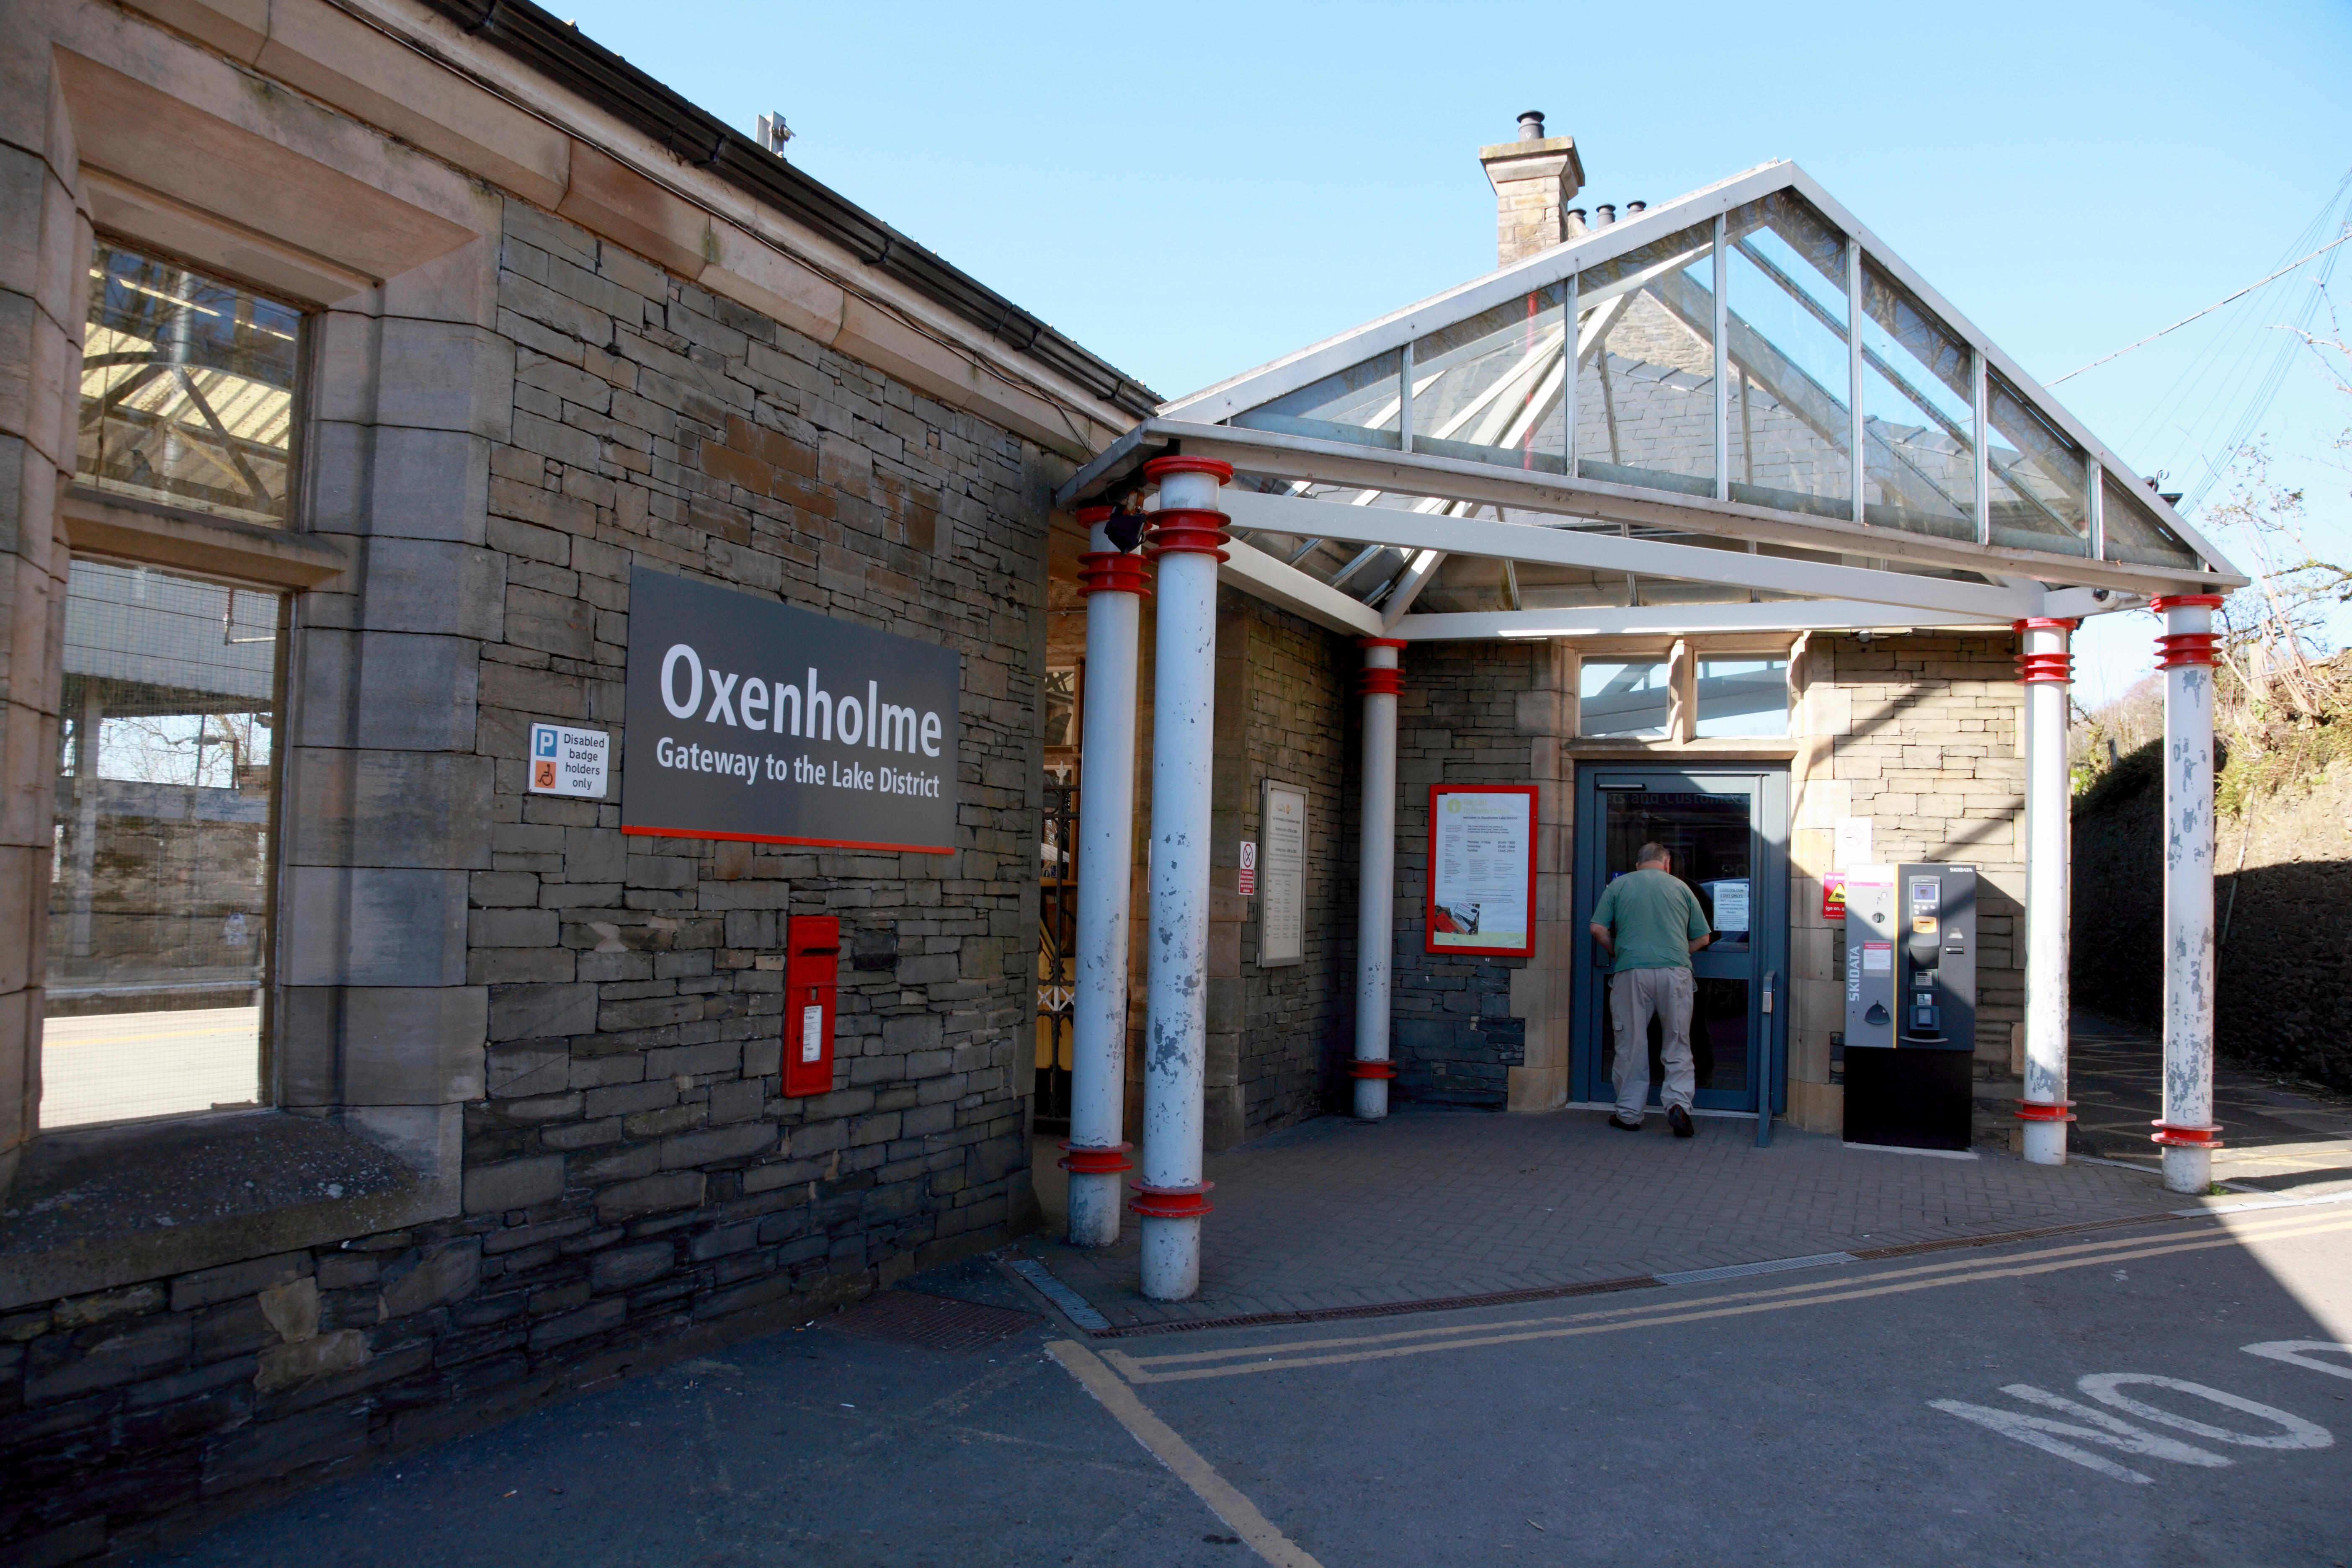 The entrance to Oxenholme station